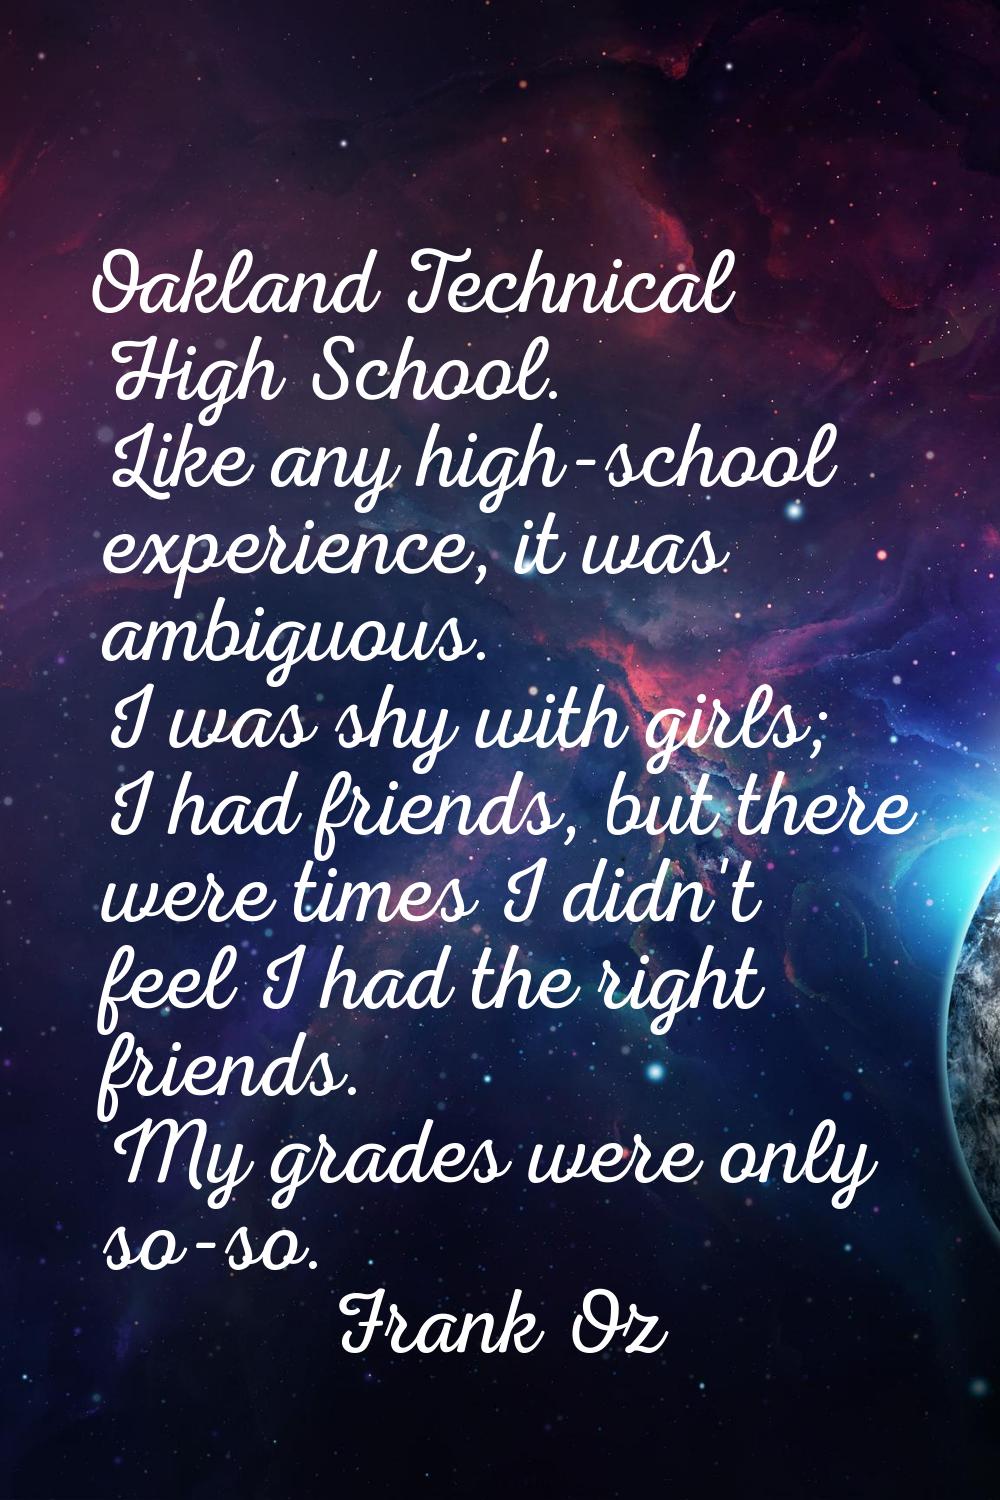 Oakland Technical High School. Like any high-school experience, it was ambiguous. I was shy with gi